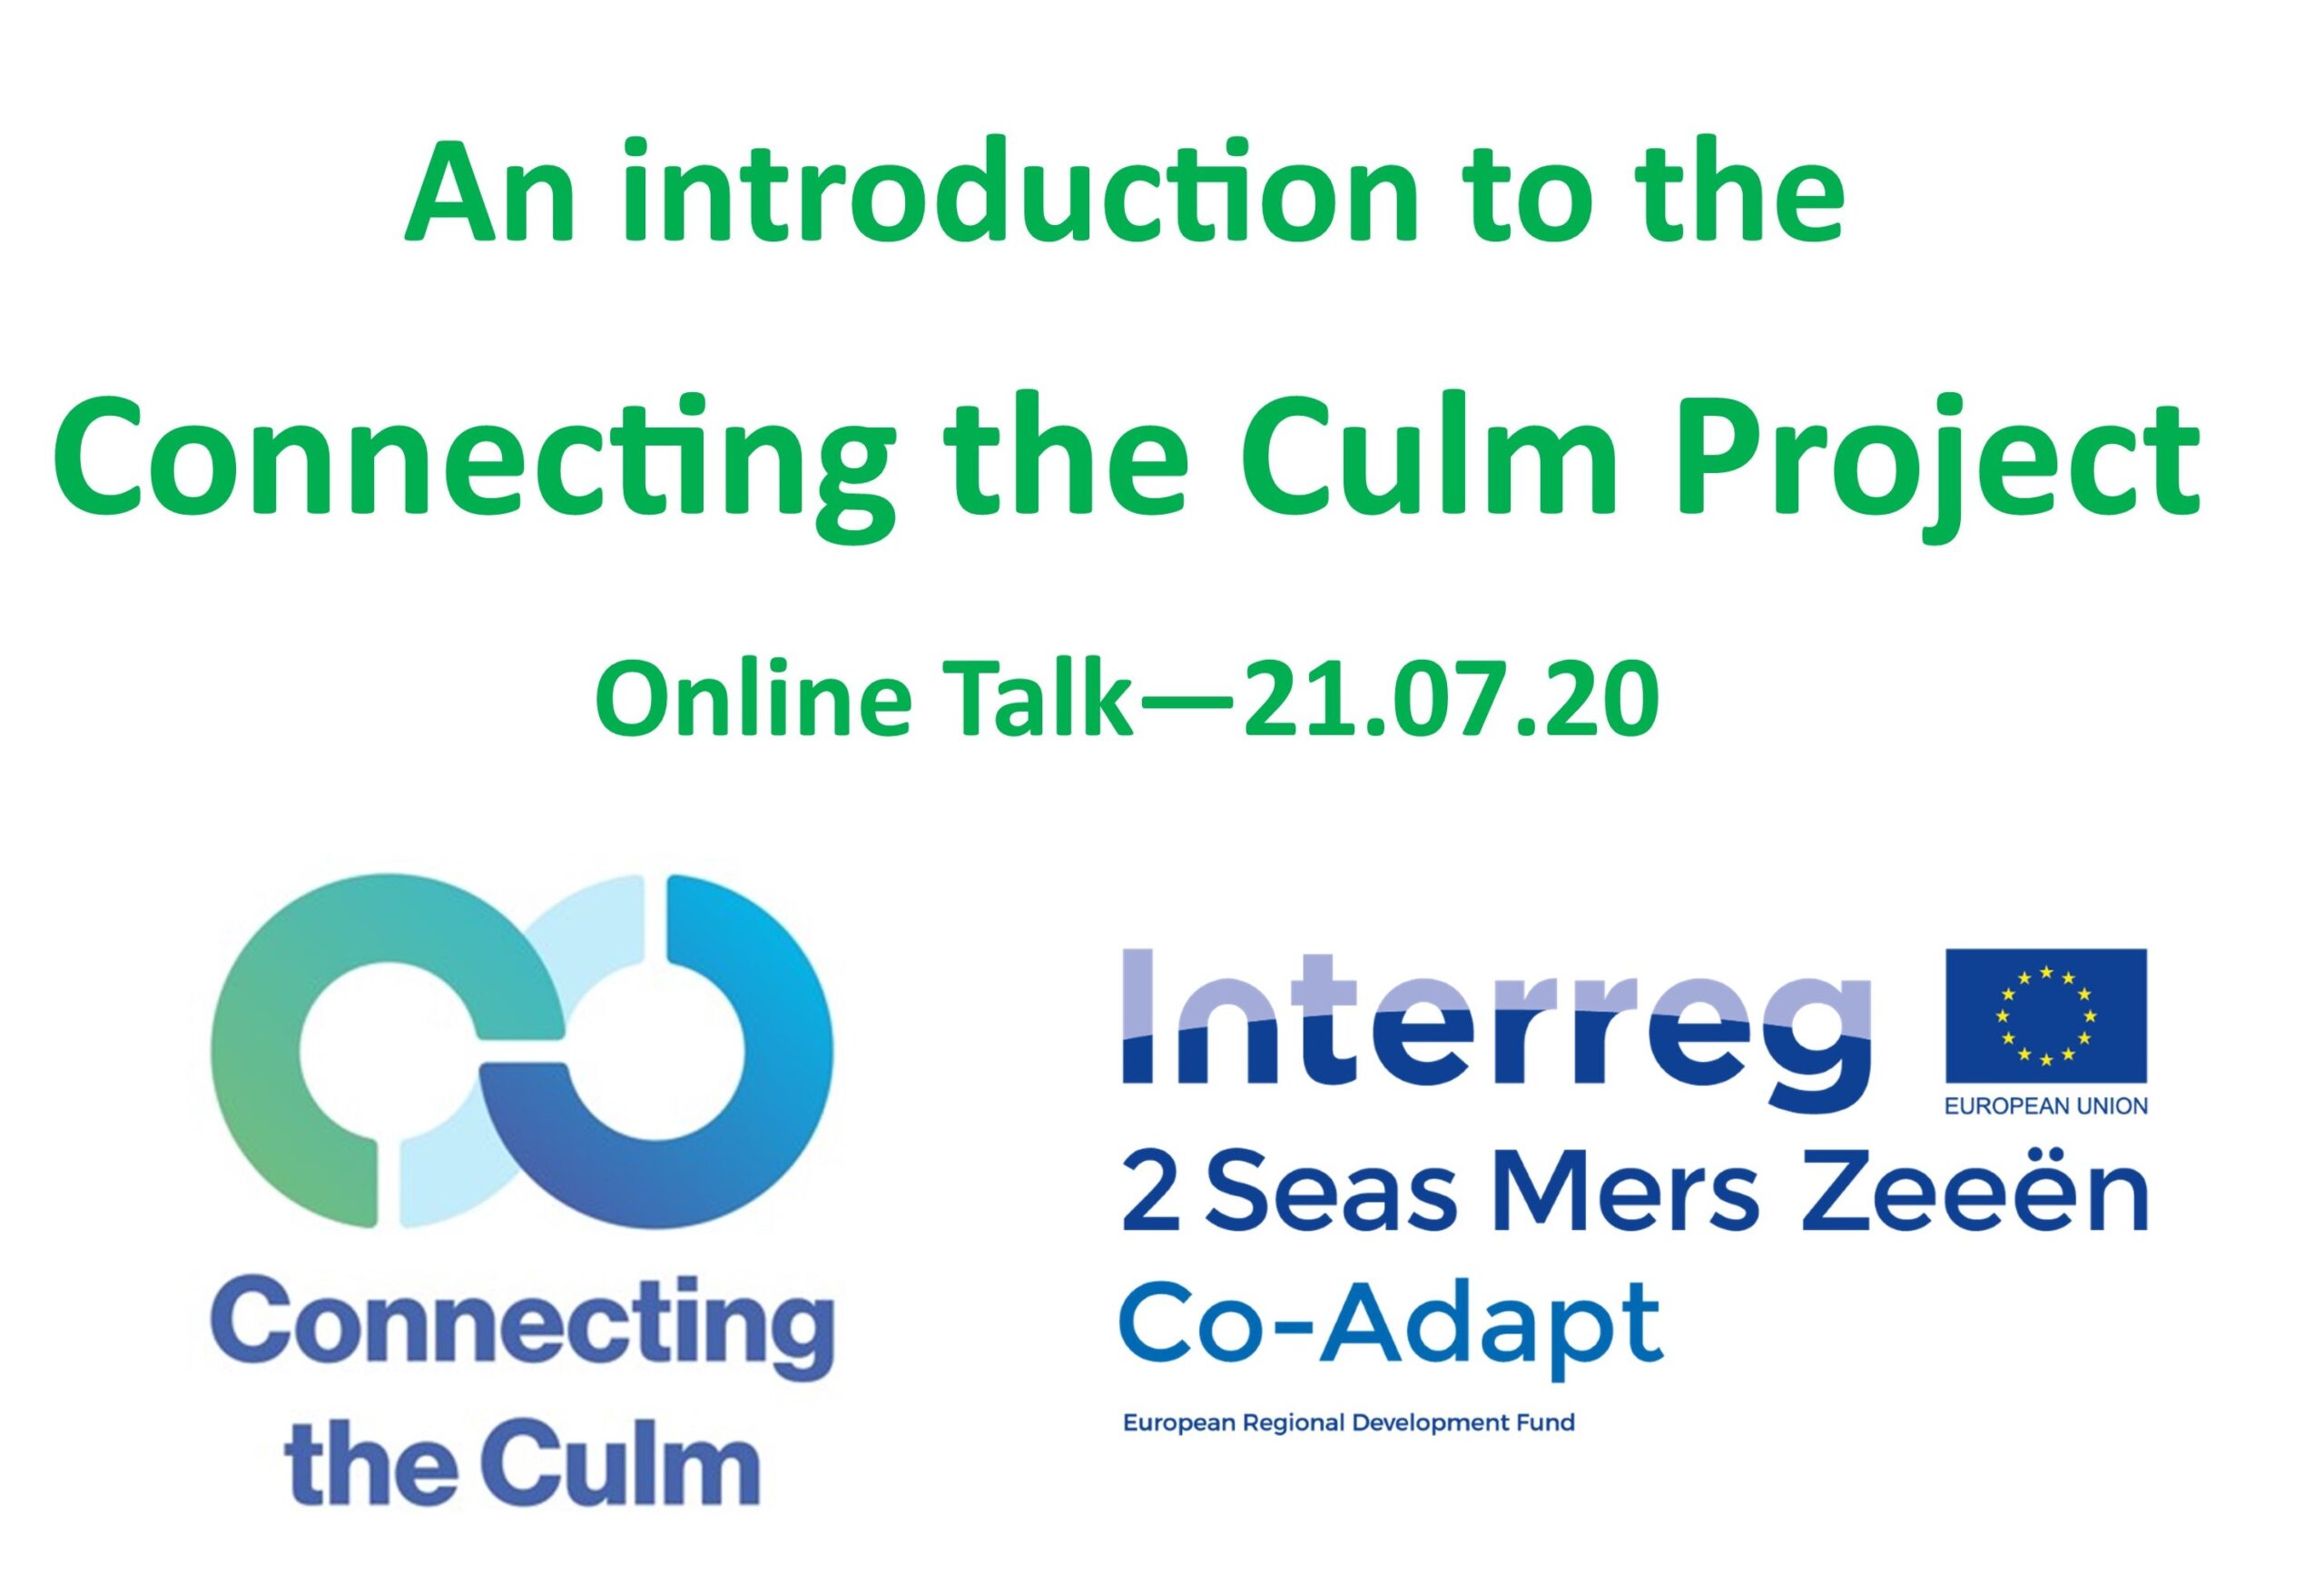 An introduction to the Connecting the Culm project - online talk 12/7/20